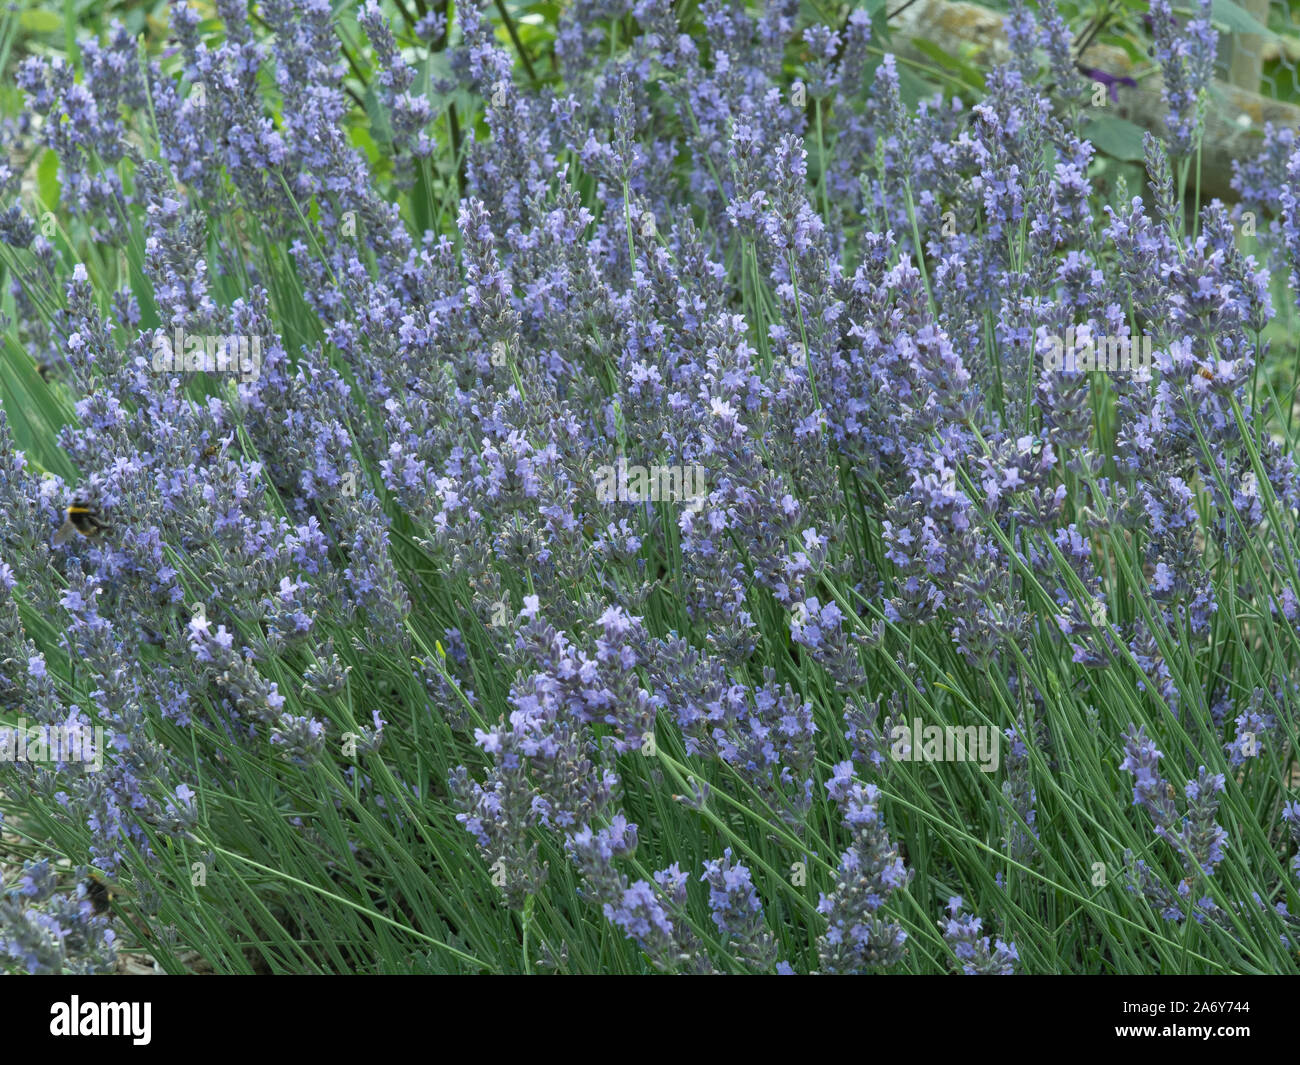 A close up of a large patch of Lavender Hidcote showing the violet flower spikes Stock Photo